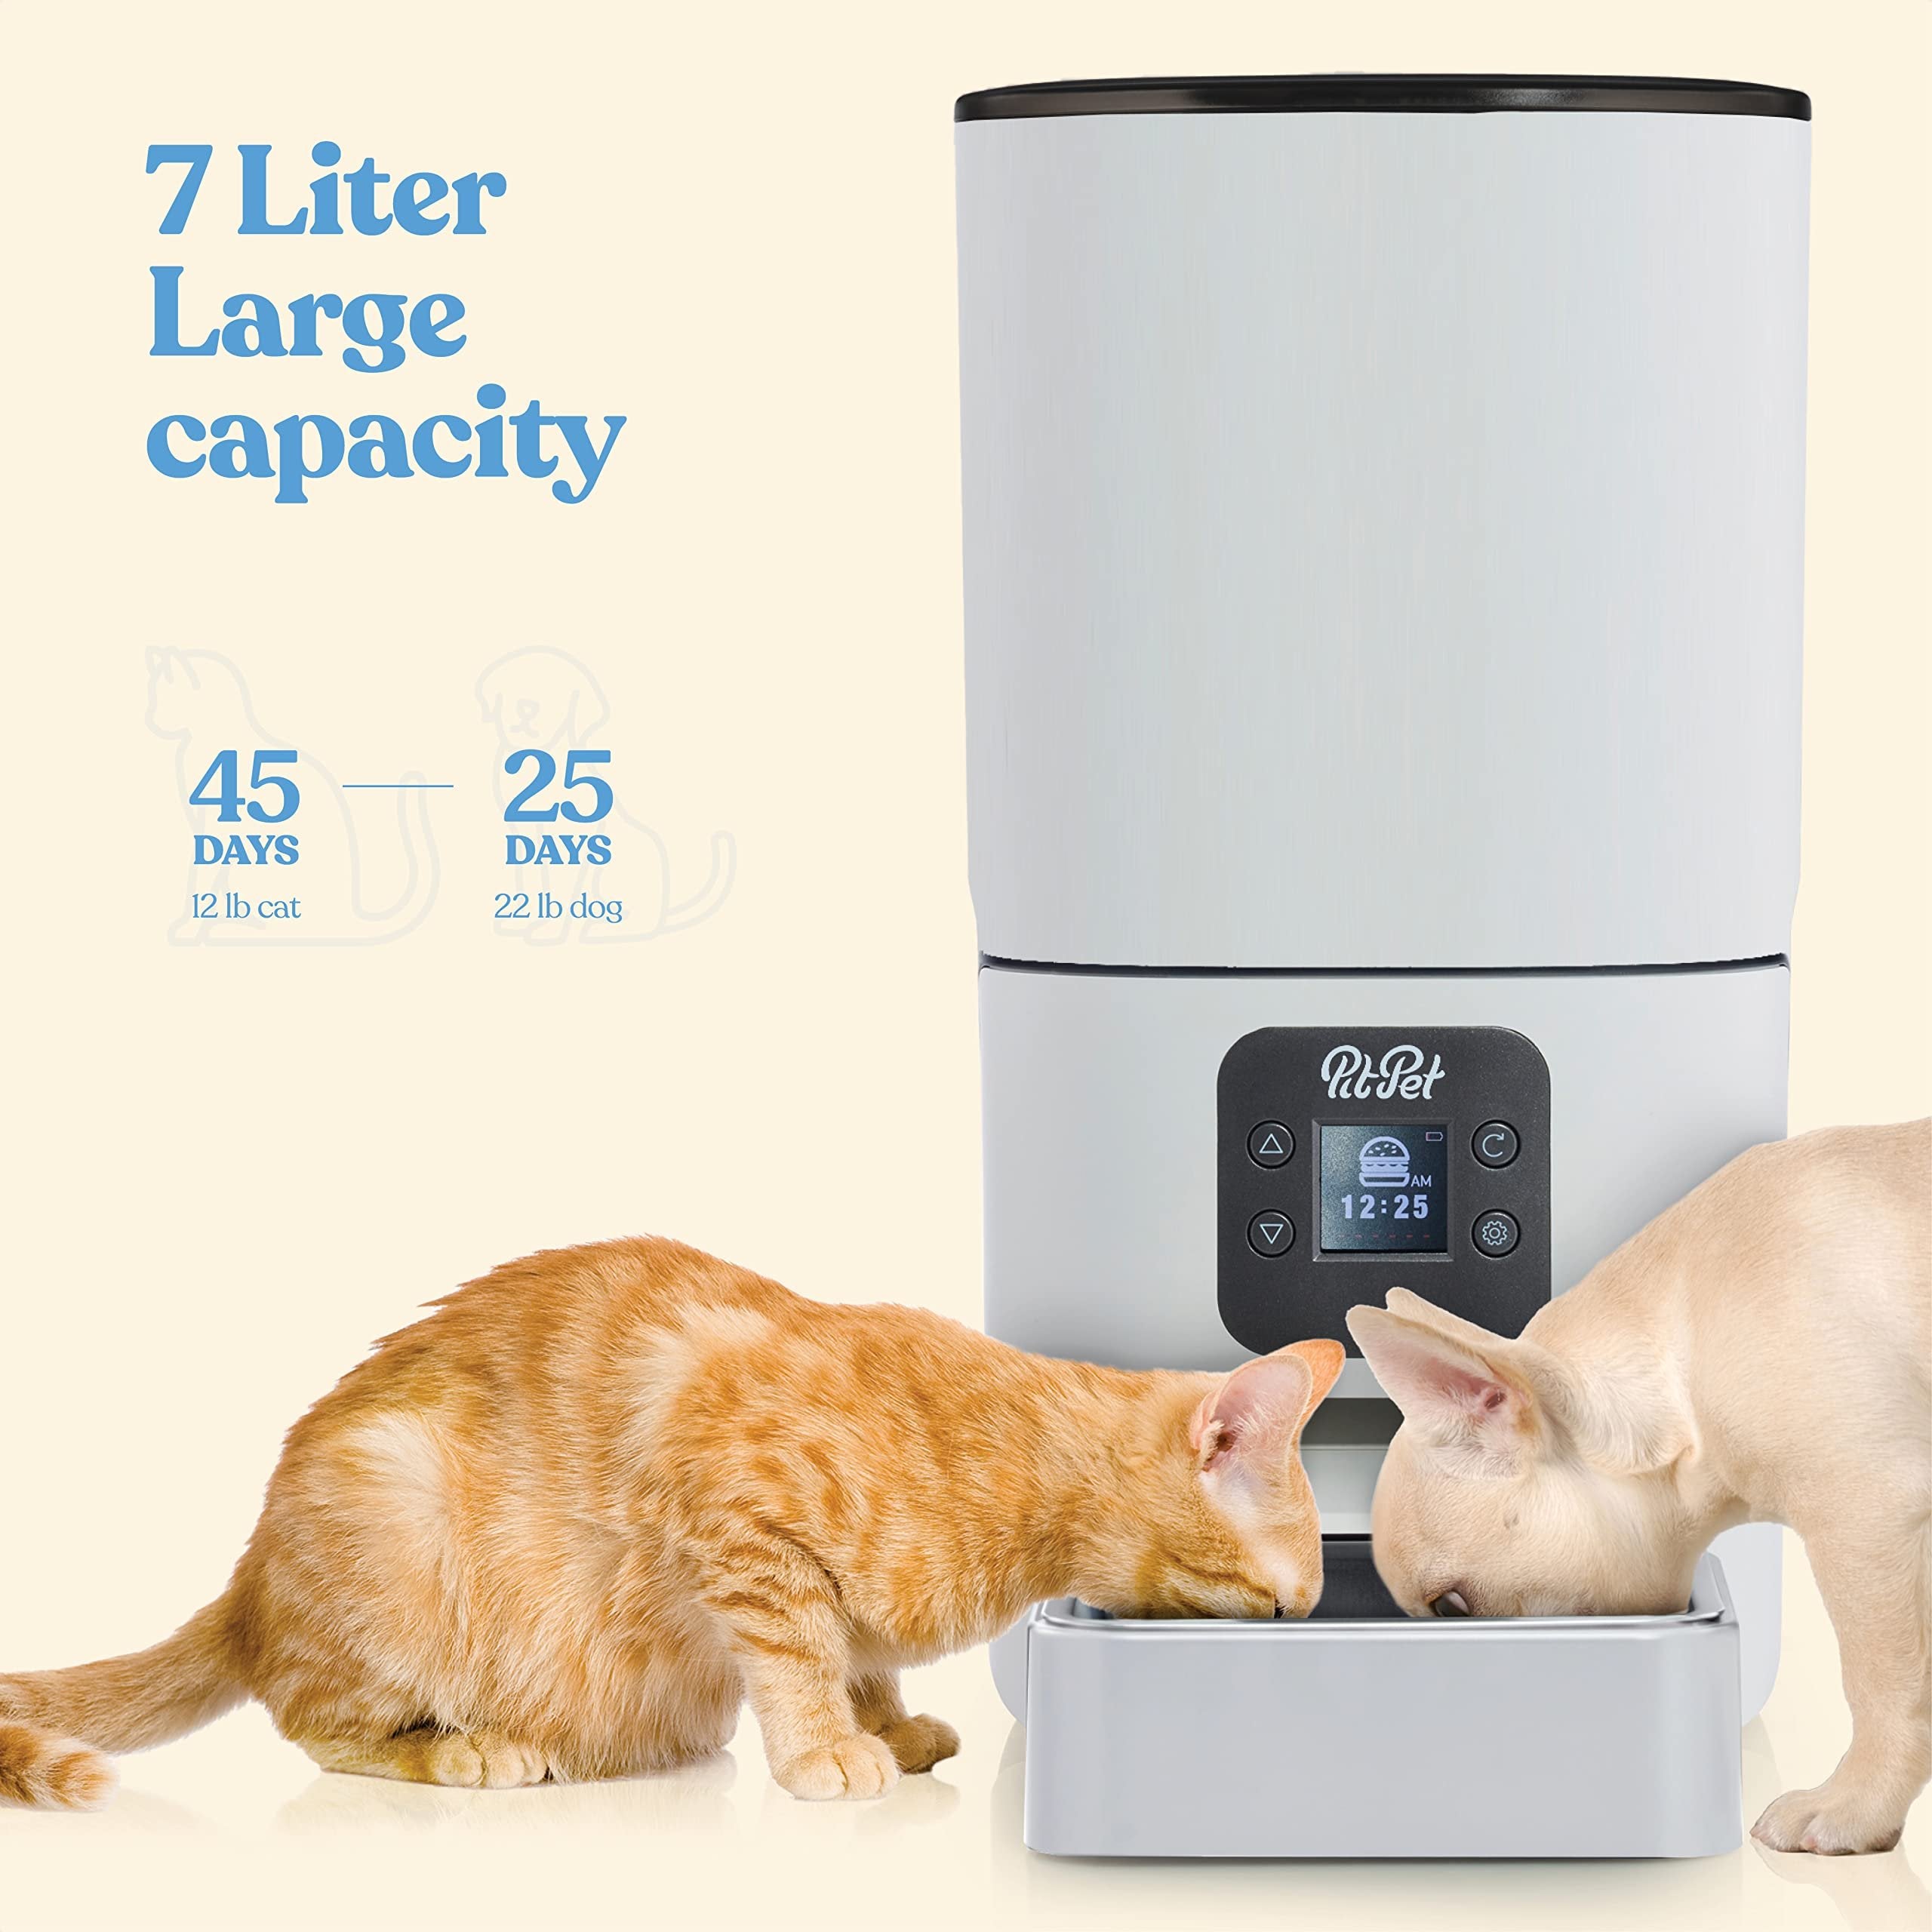 Smart Automatic Cat Feeder - 6-L Reliable Automatic Cat Food Dispenser with Display LCD Screen for Easy Set Up -Portion Control Automatic Dog Feeder - (White, 7 Litter (30 Cups))